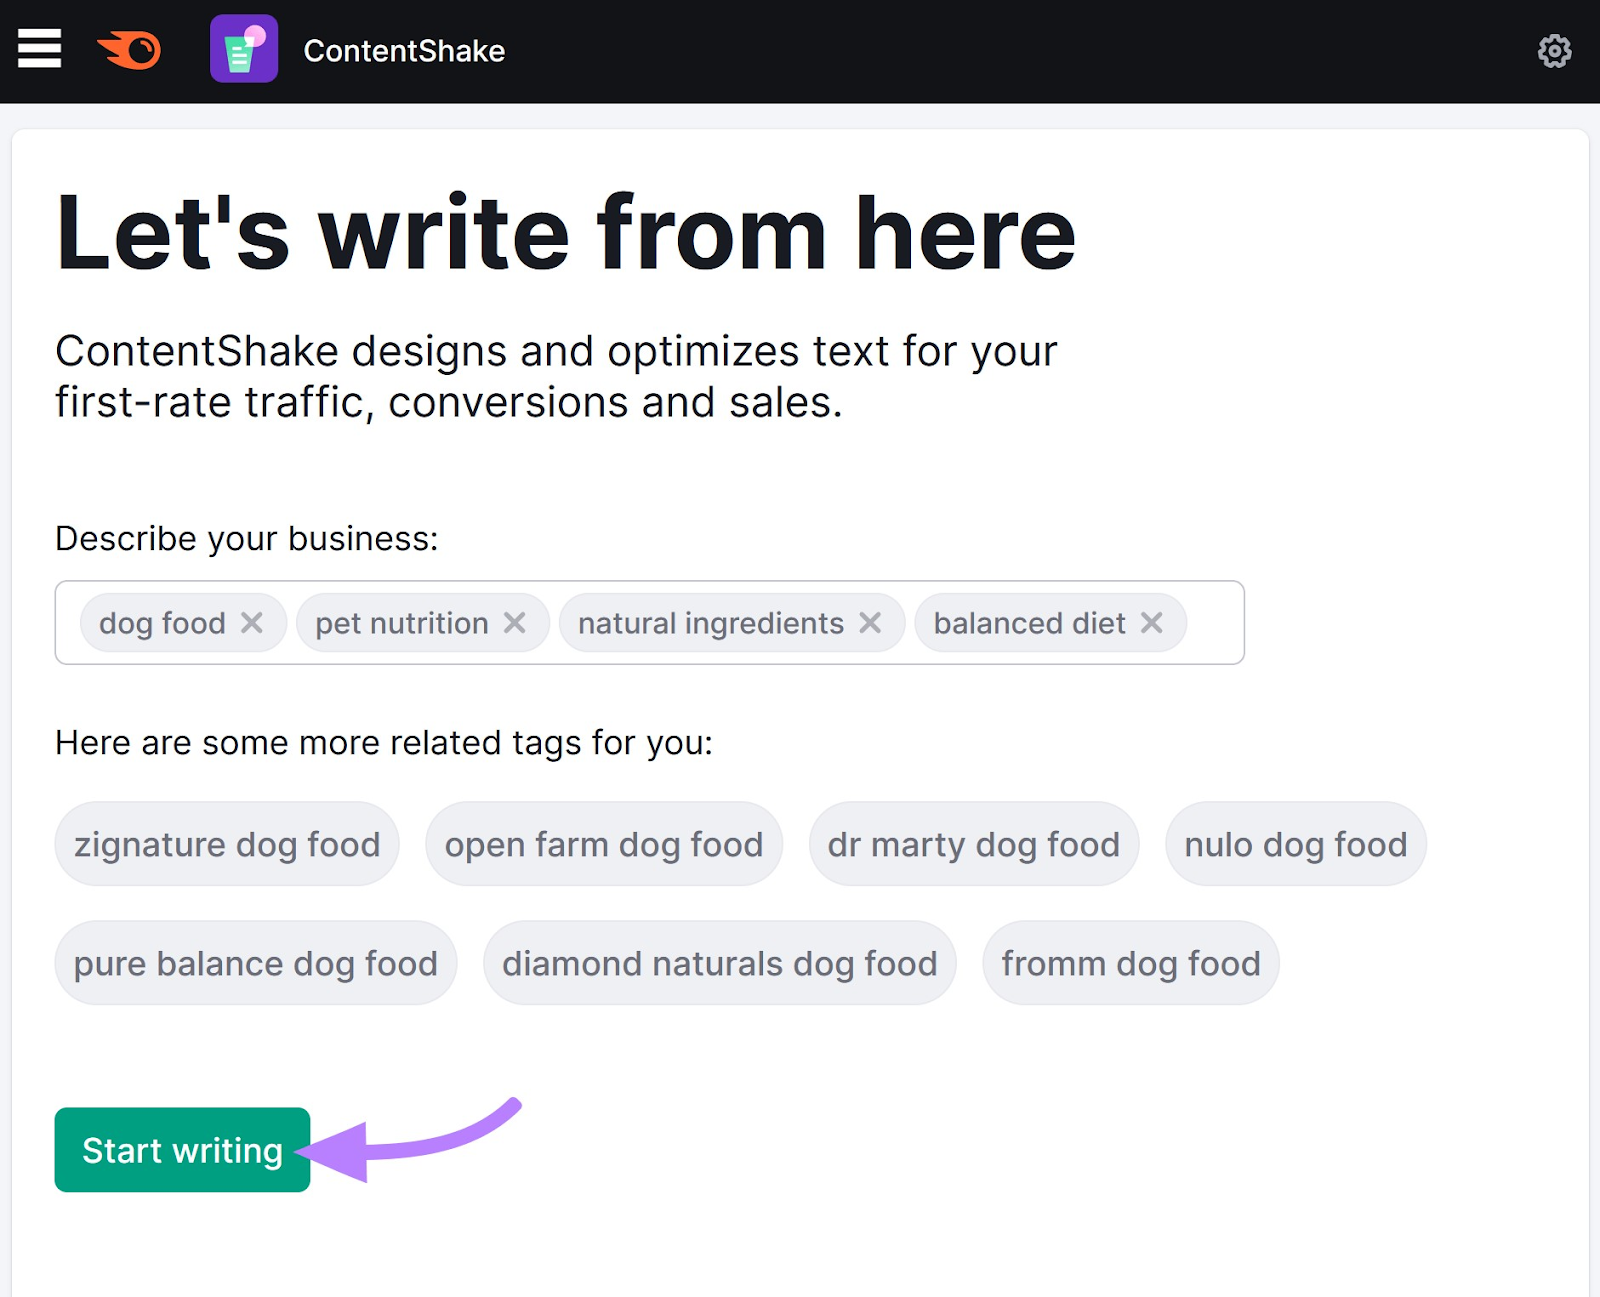 tags like "dog food" and "pet nutrition" entered in ContentShake search bar